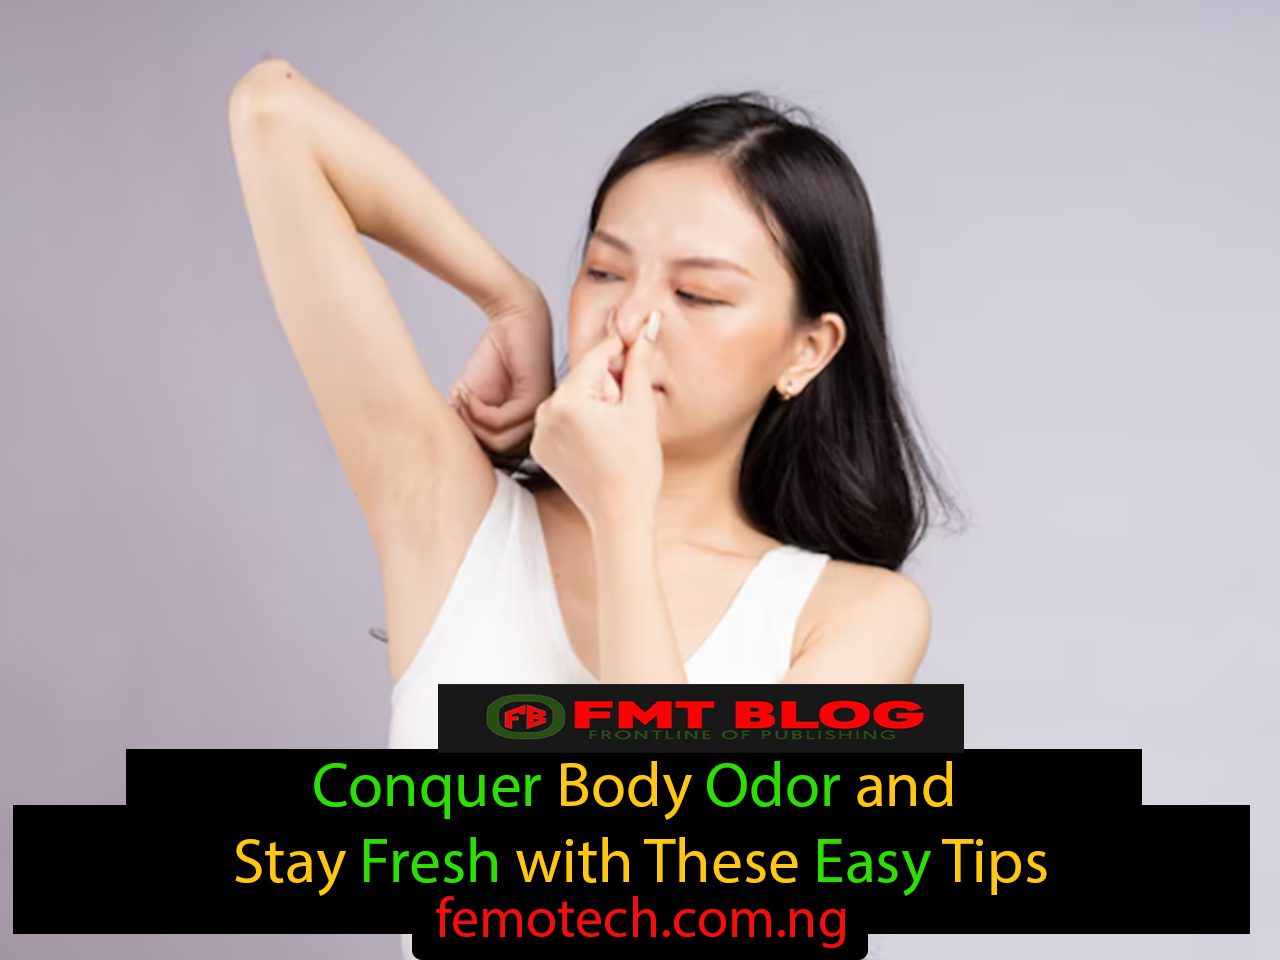 Conquer Body Odor and Stay Fresh with These Easy Tips